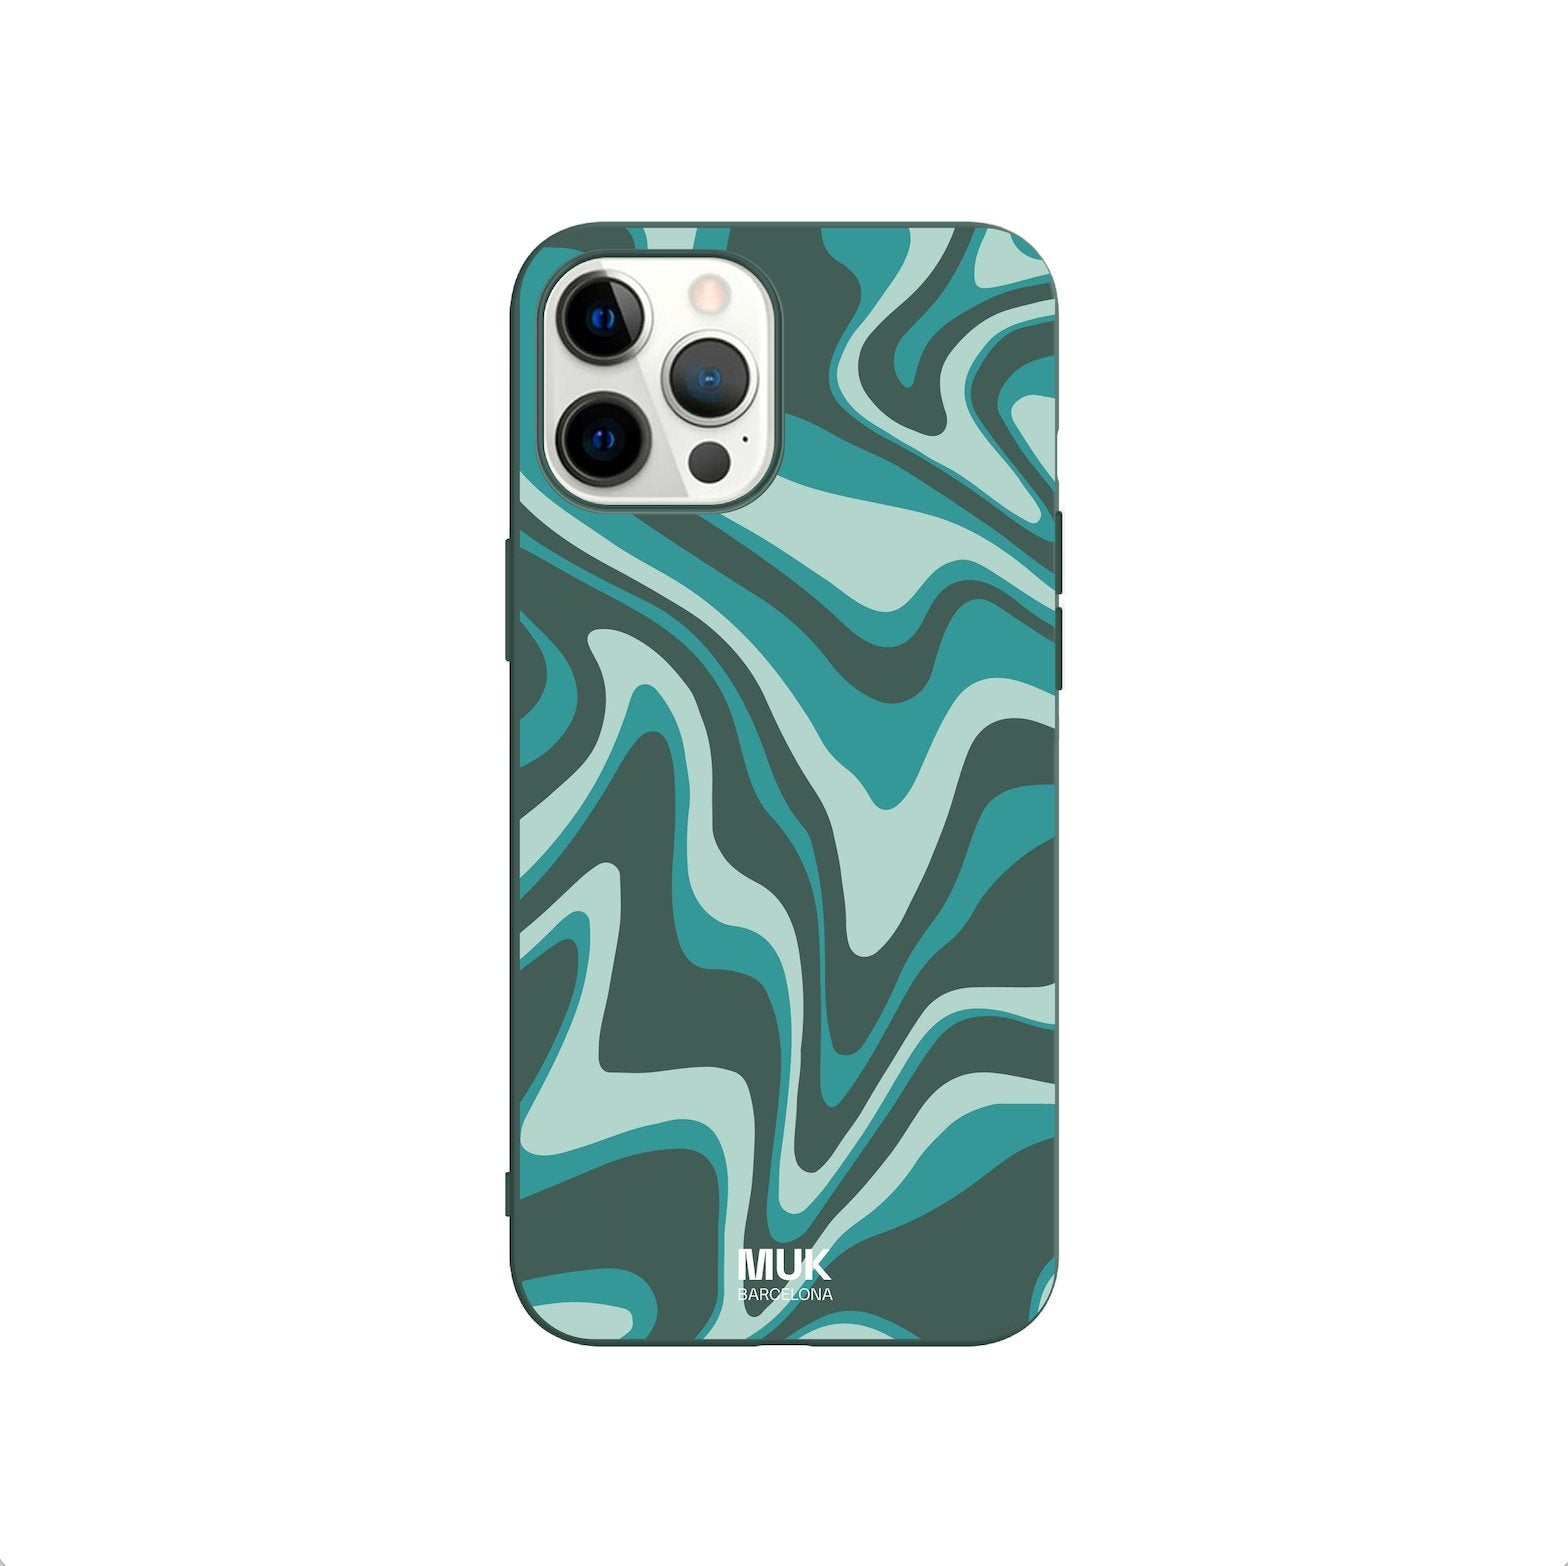 TPU lagoon Phone Case with distorted effect.
